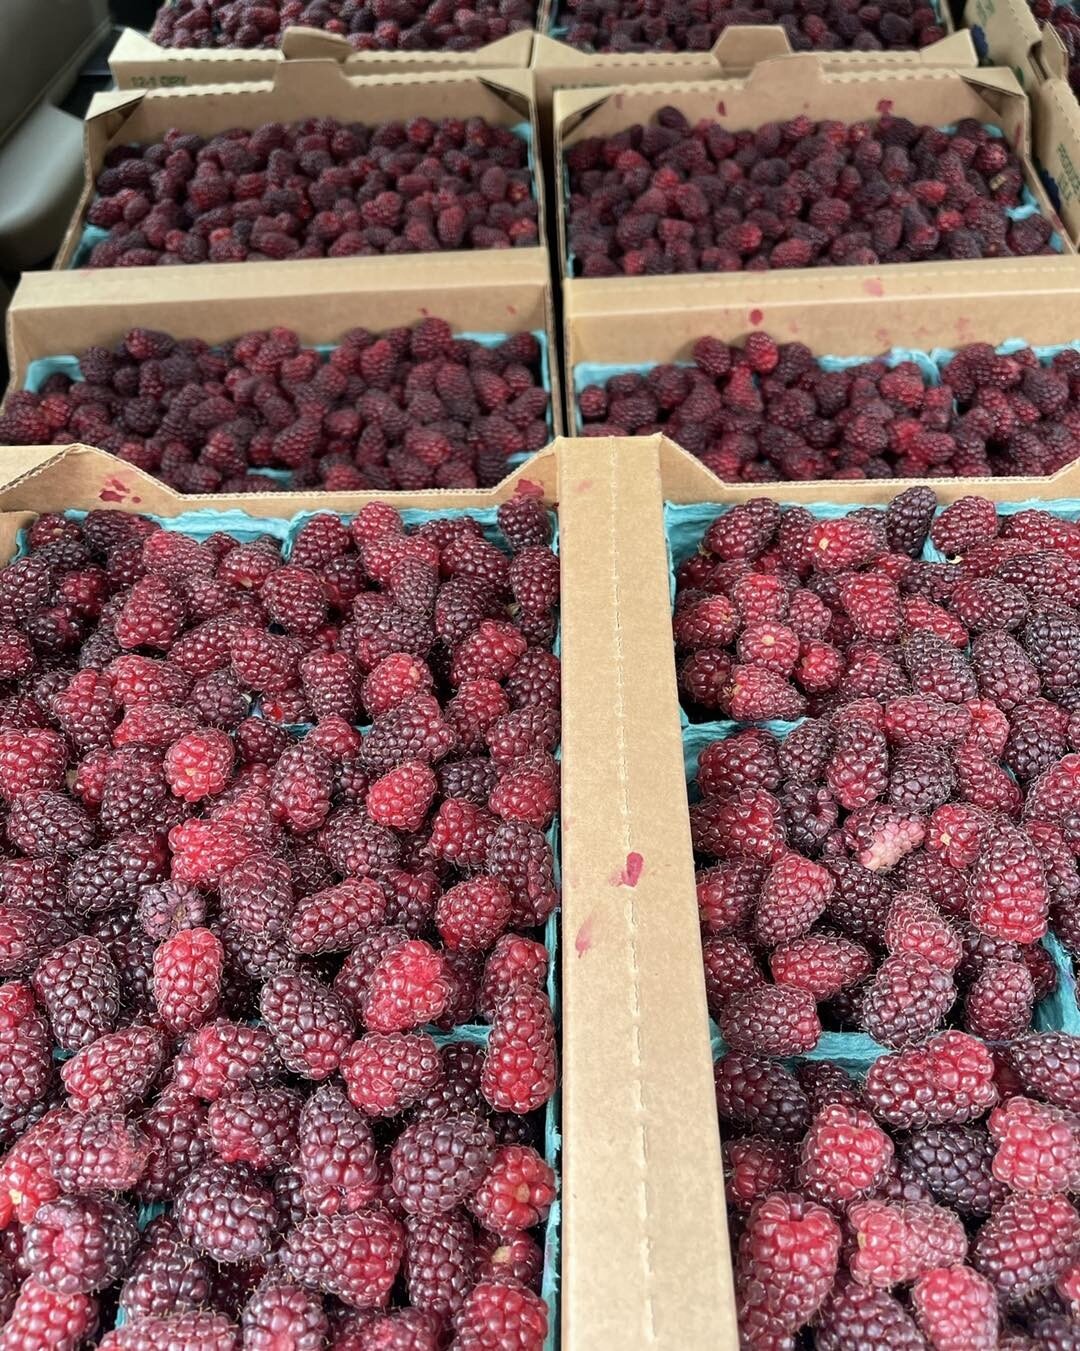 Tayberry jam will be available again at the markets, stop by for samples, if you&rsquo;re not sure what they are then give it a quick google as that&rsquo;s quicker than me explaining haha.
Manzanita Friday 4-7
Newport &amp; Neskowin Saturday 9-1
Yac